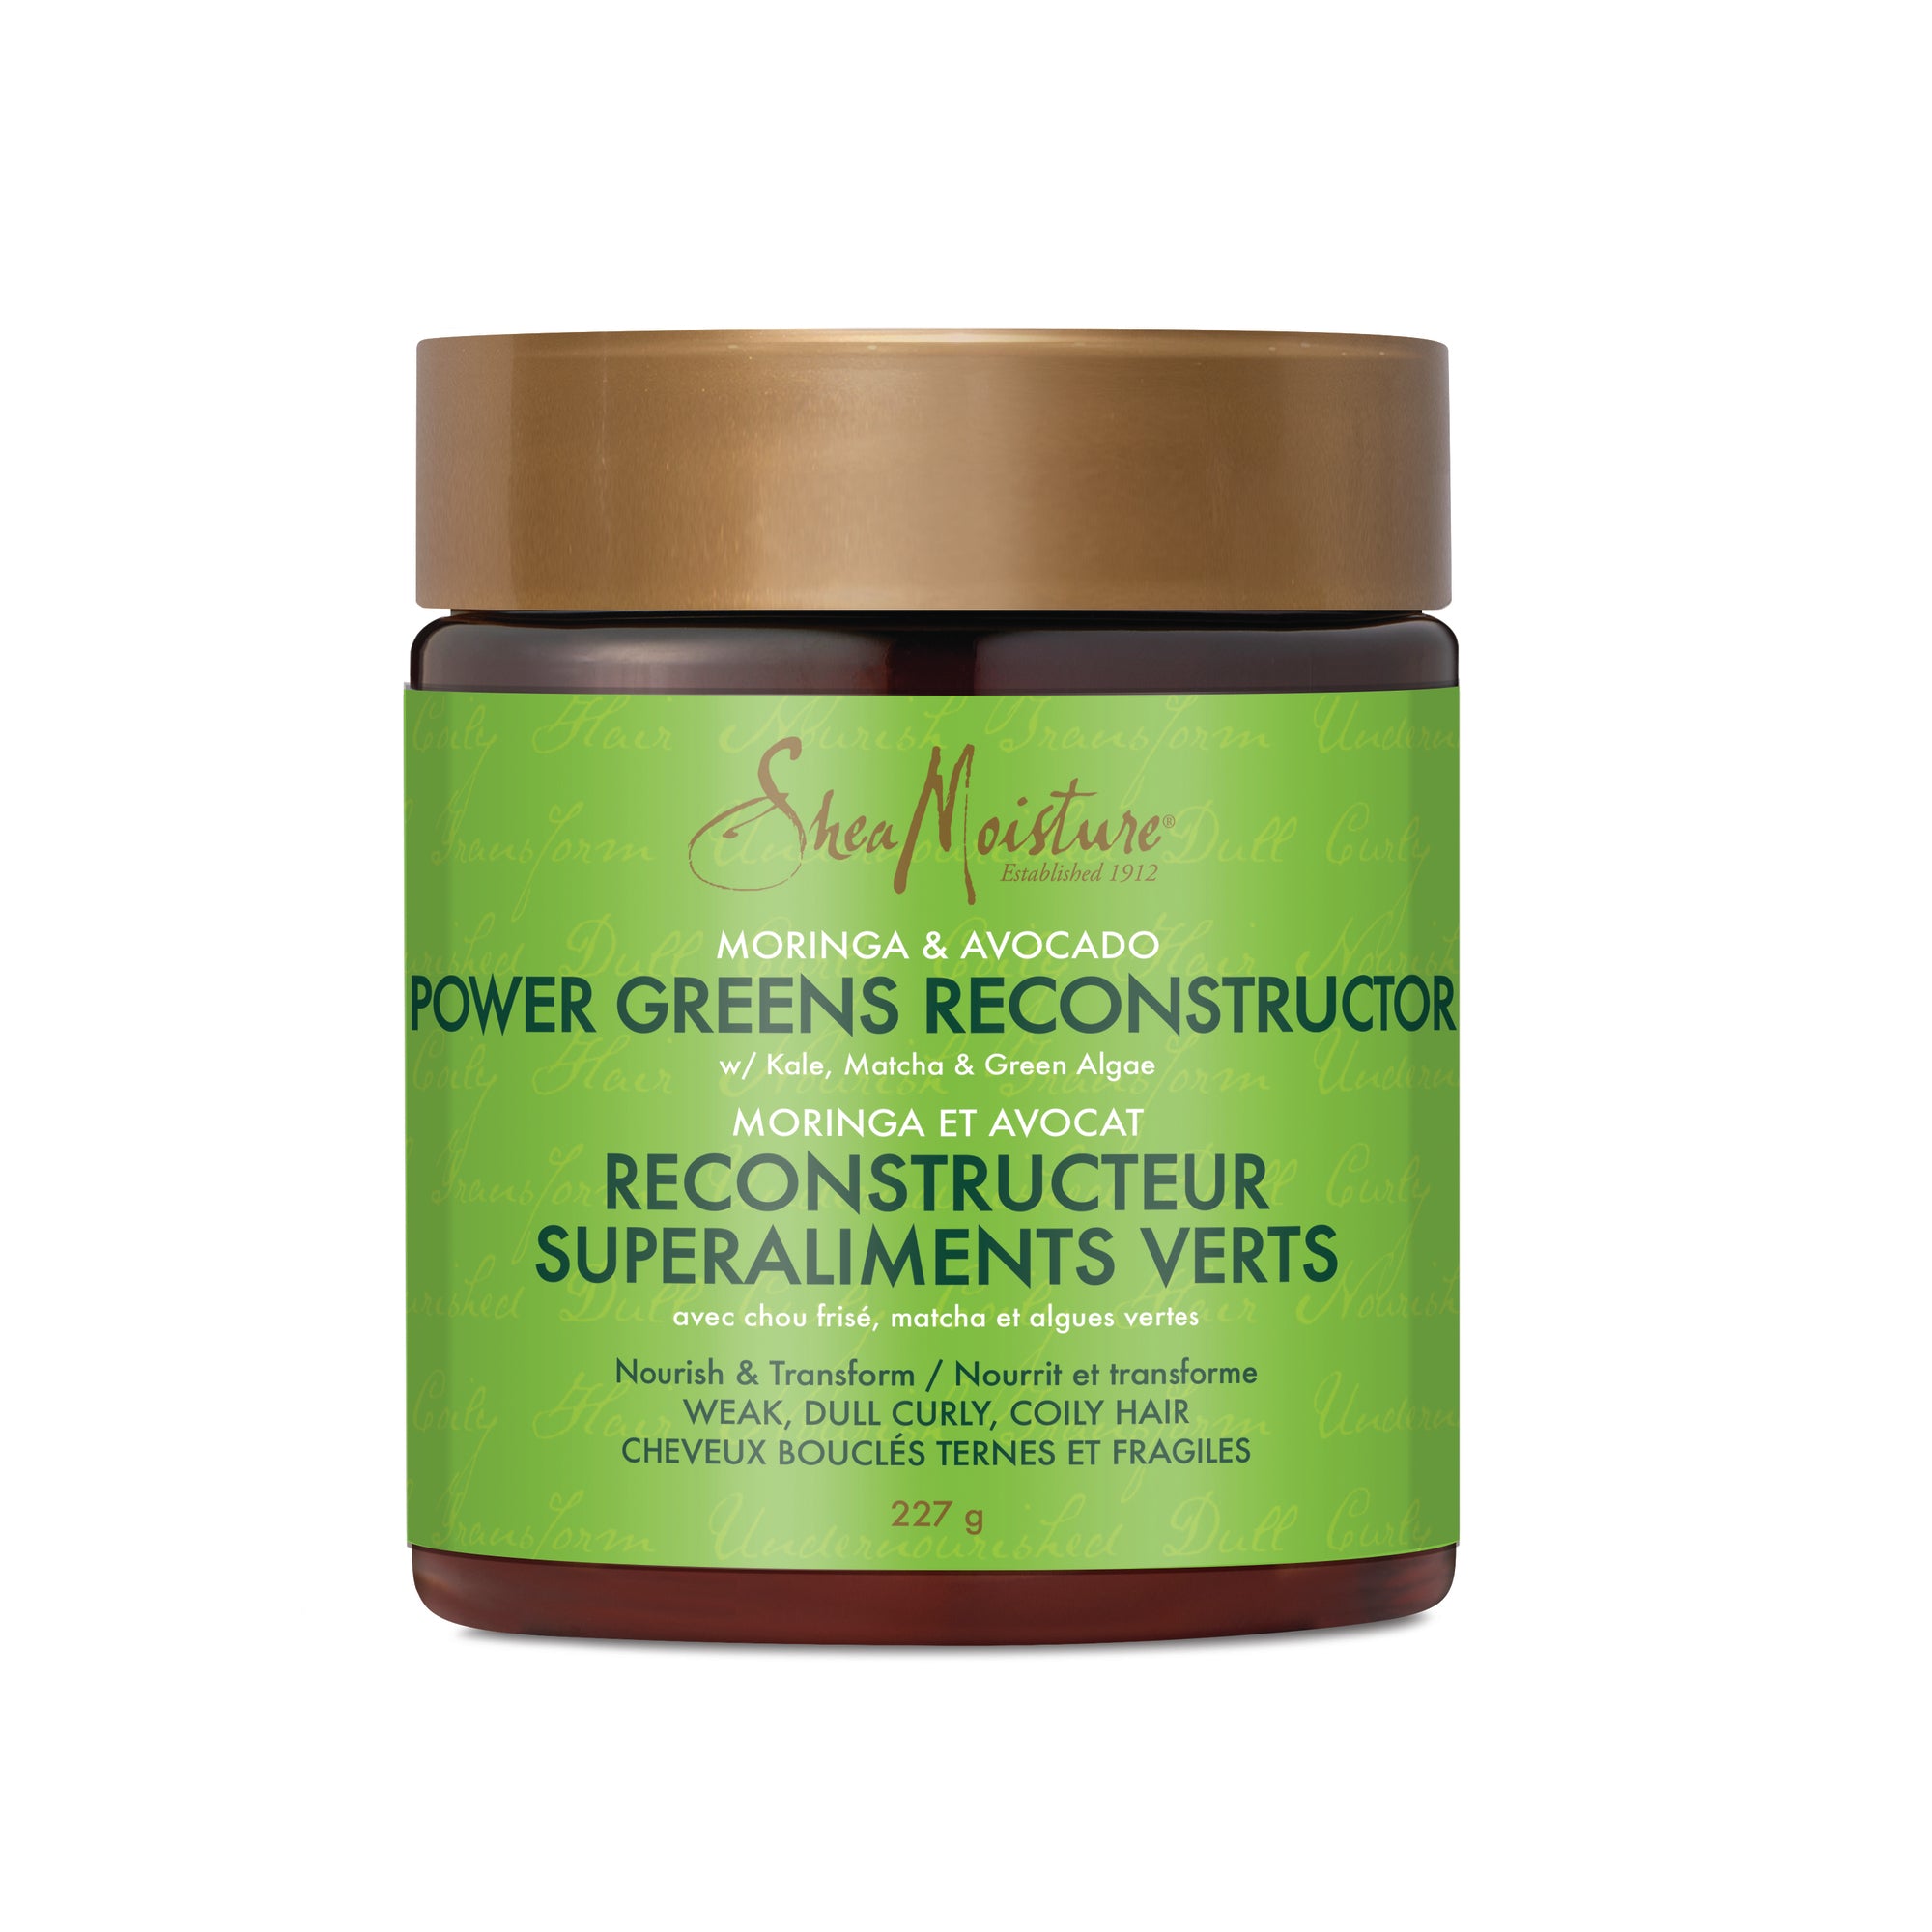 Showing the front angle view of the SheaMoisture Power Greens Moringa & Avocado Reconstructor 227g product.